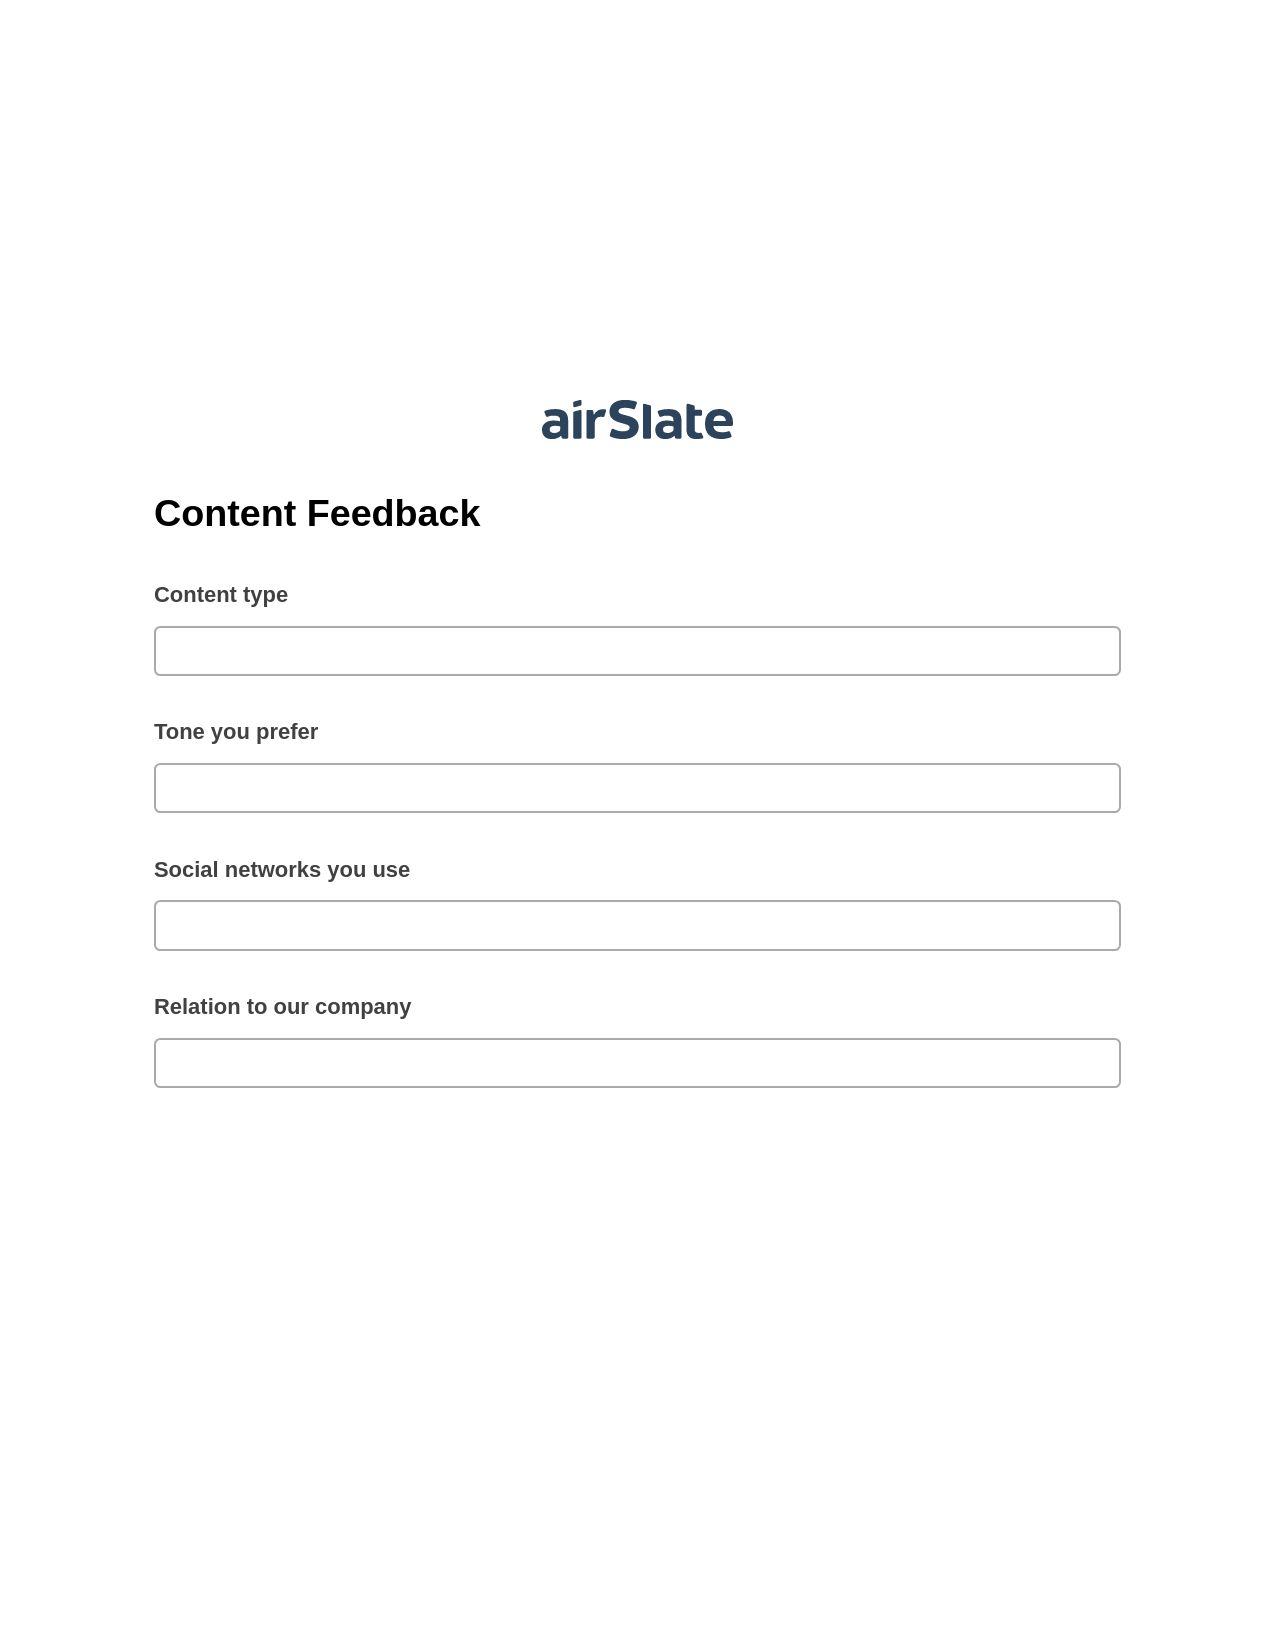 Multirole Content Feedback Pre-fill Slate from MS Dynamics 365 Records Bot, Hide Signatures Bot, Slack Notification Postfinish Bot